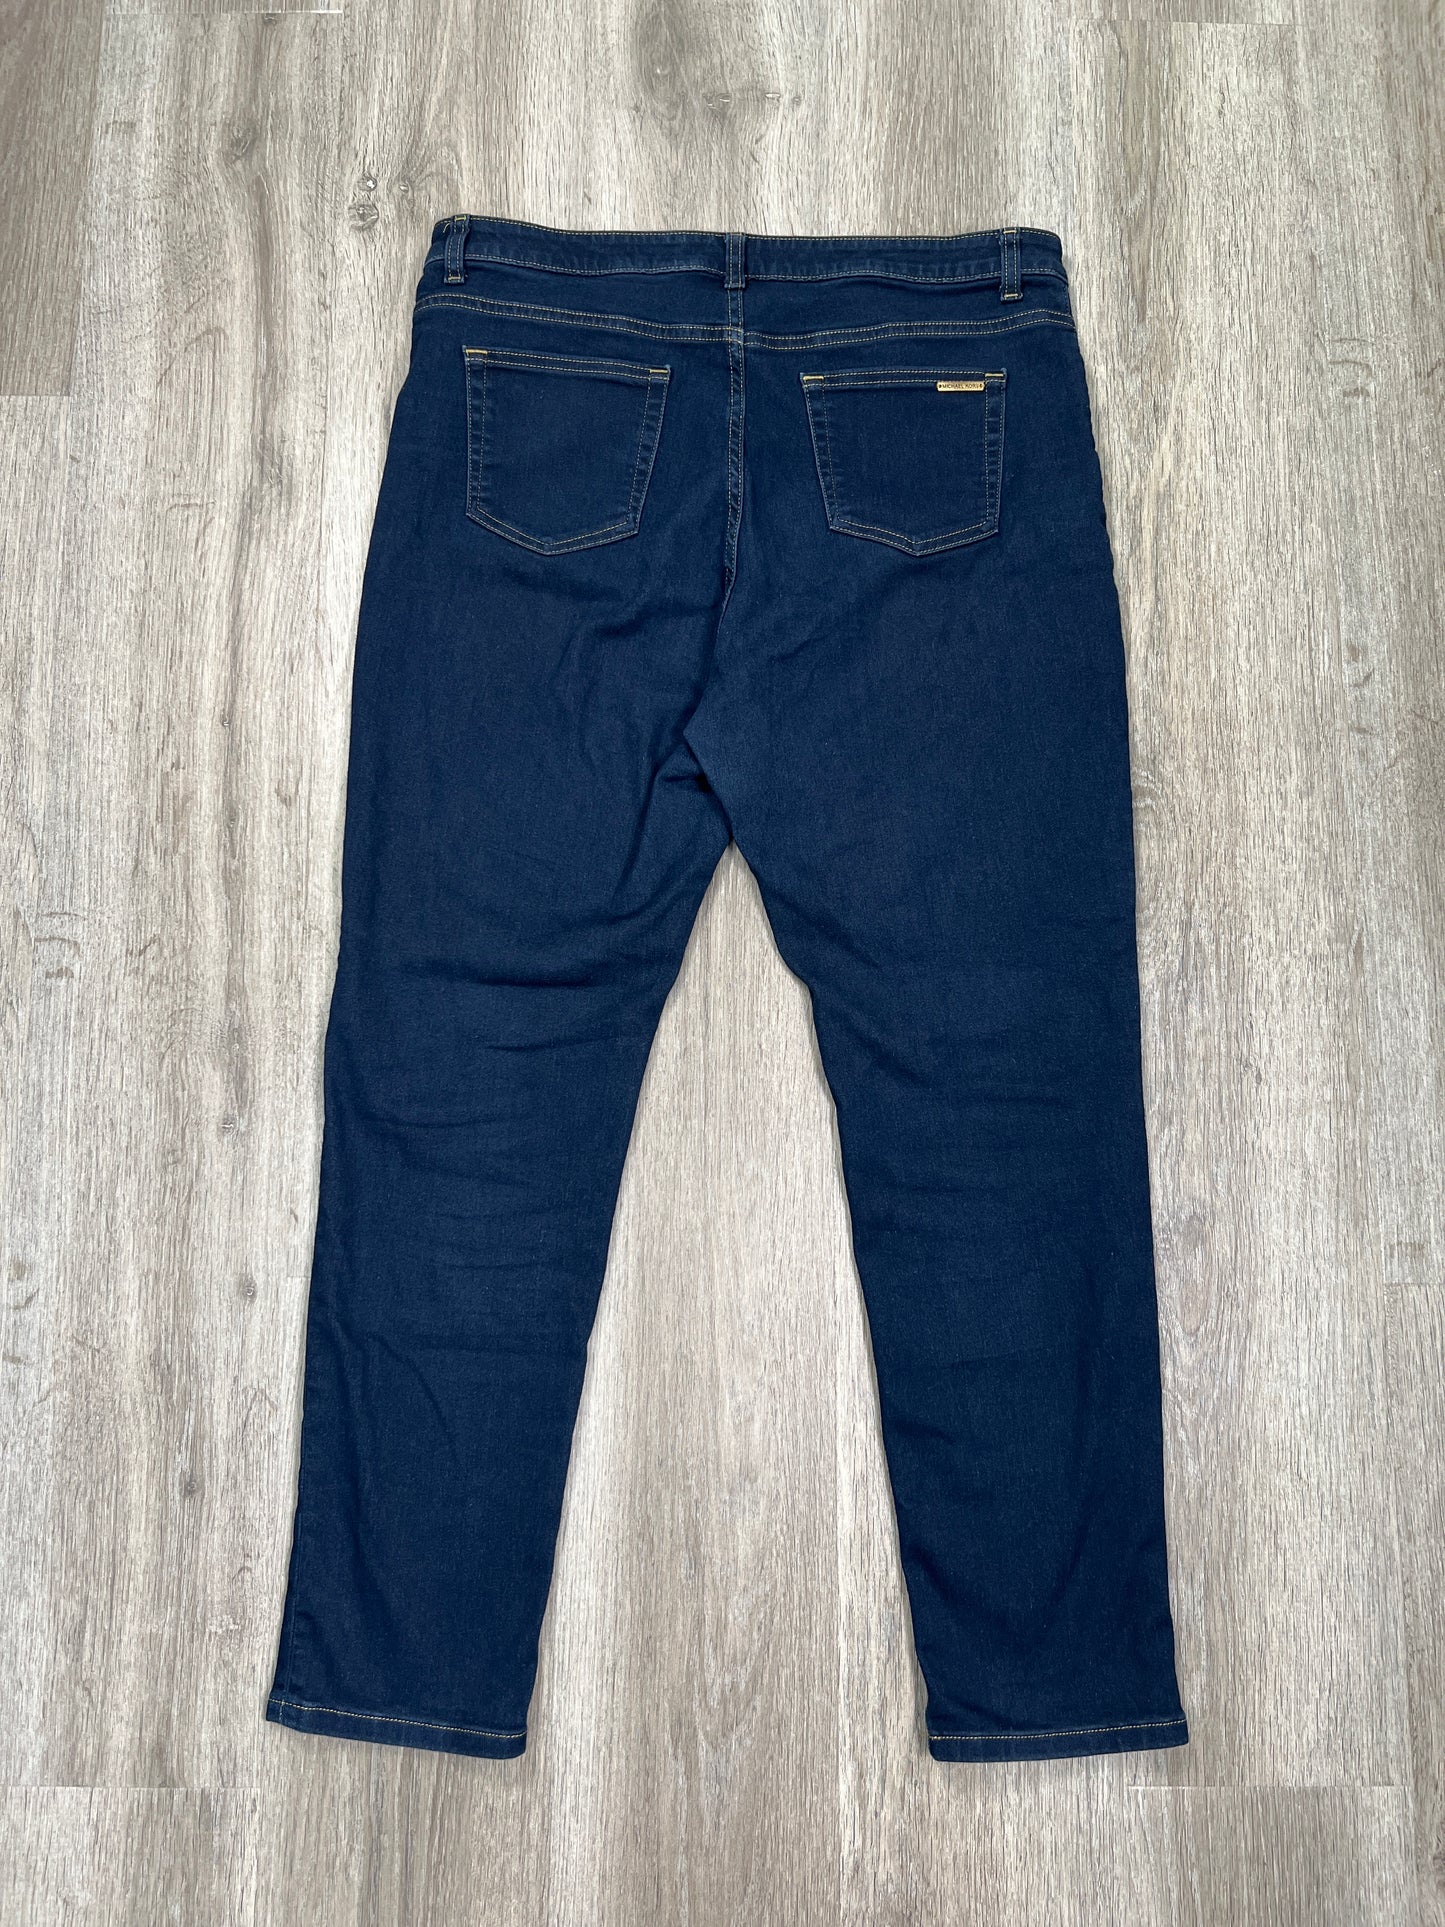 Jeans Skinny By Michael Kors  Size: 16